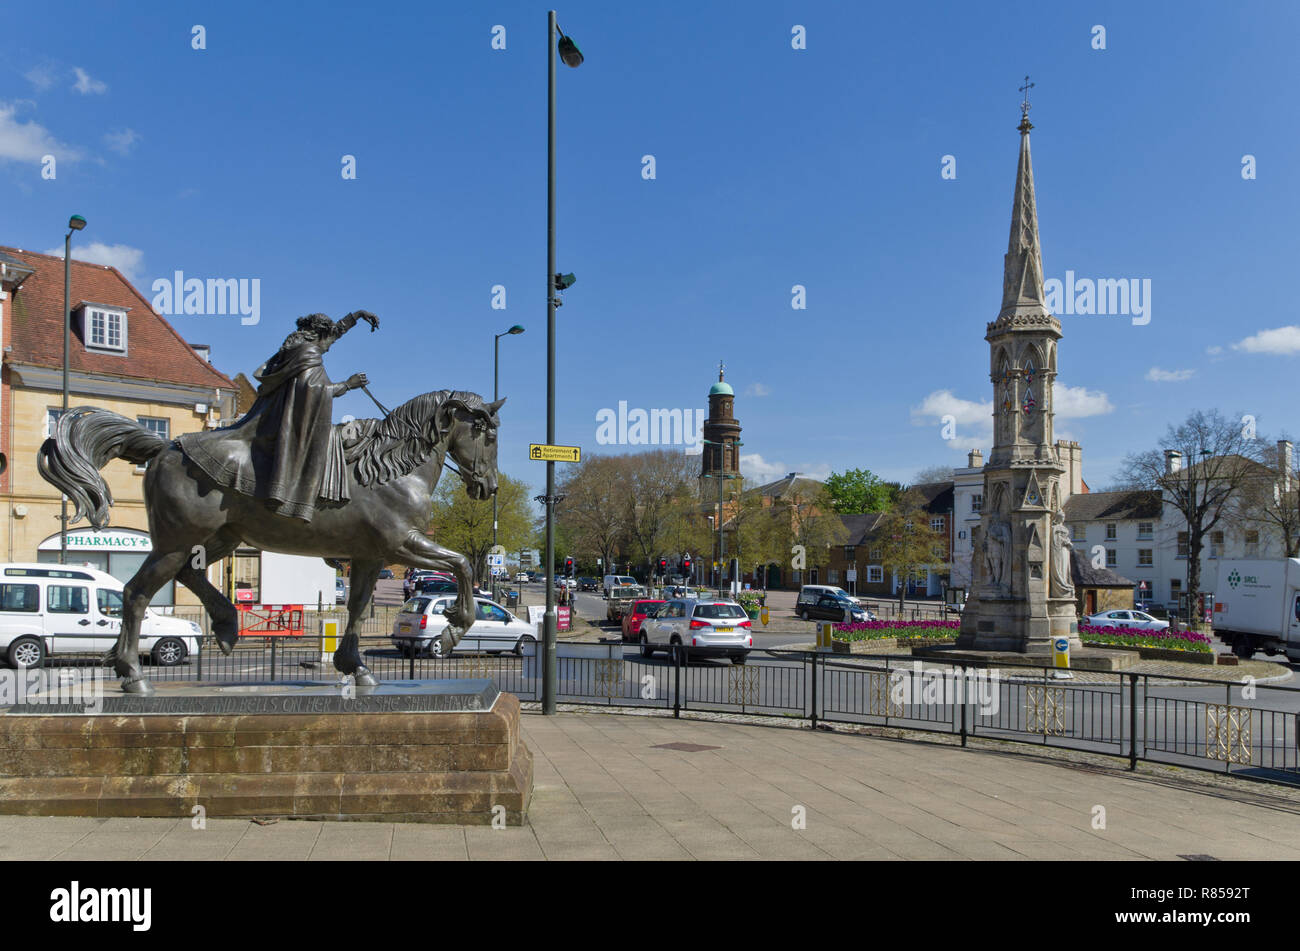 Three Banbury icons - the Fine Lady statue, the Banbury Cross and in the middle the church tower of St Mary; Oxfordshire, UK Stock Photo